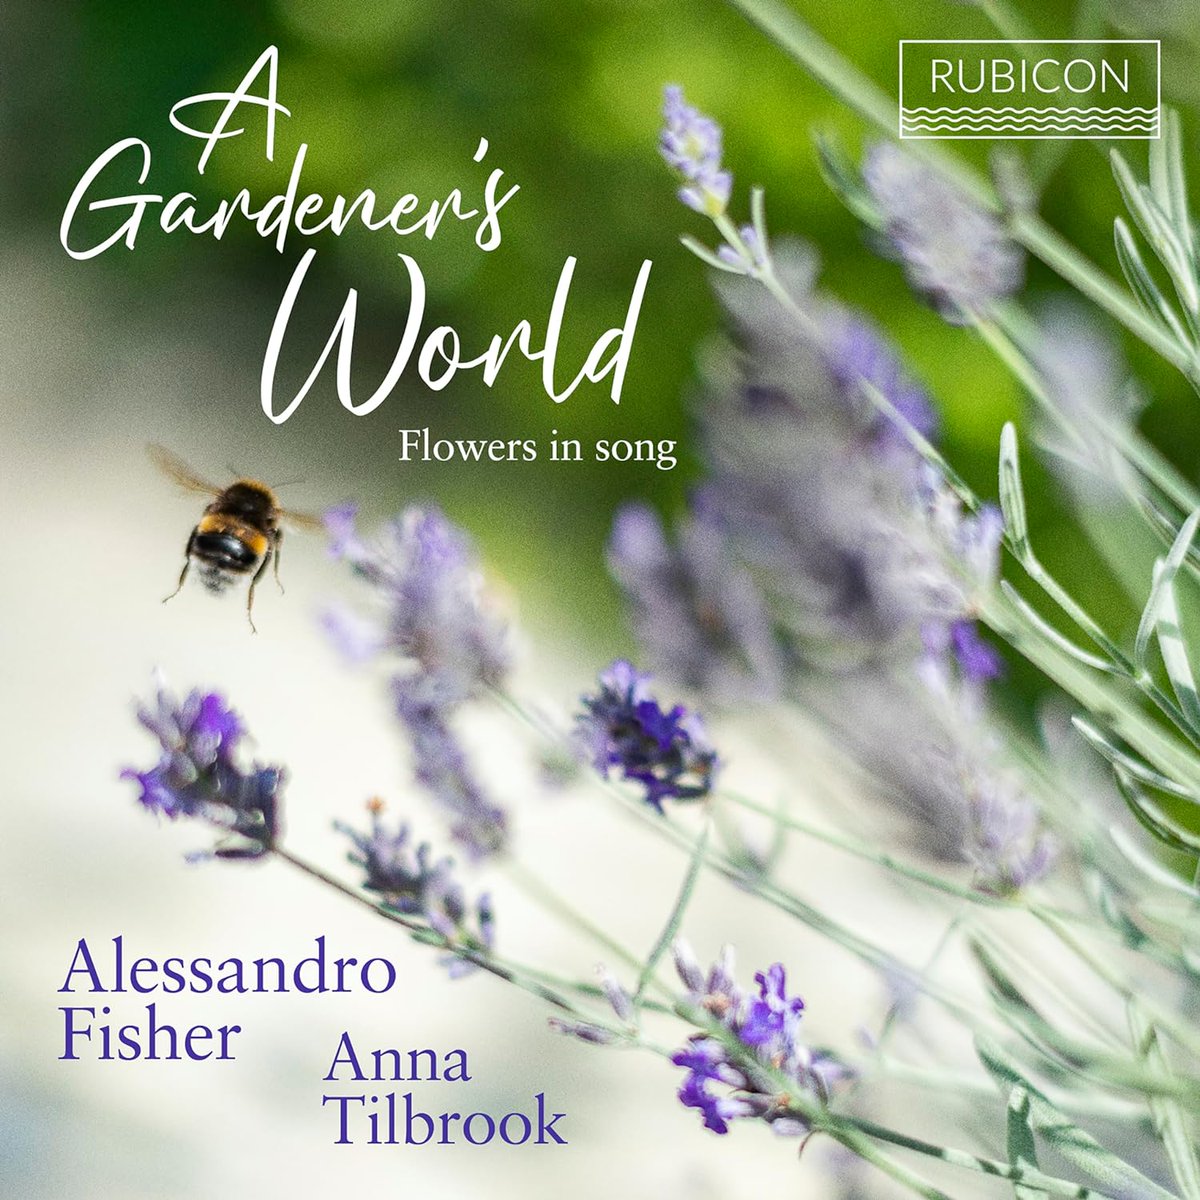 Read all about it! Latest @bbtrustmusic news. Tenor Alessandro Fisher releases his debut recital disc on Rubicon Classics on 23 February: A Gardener's World. Hear excerpts here bit.ly/49EsYgi and read more here: bit.ly/49hRW50 #BBTrustfamily